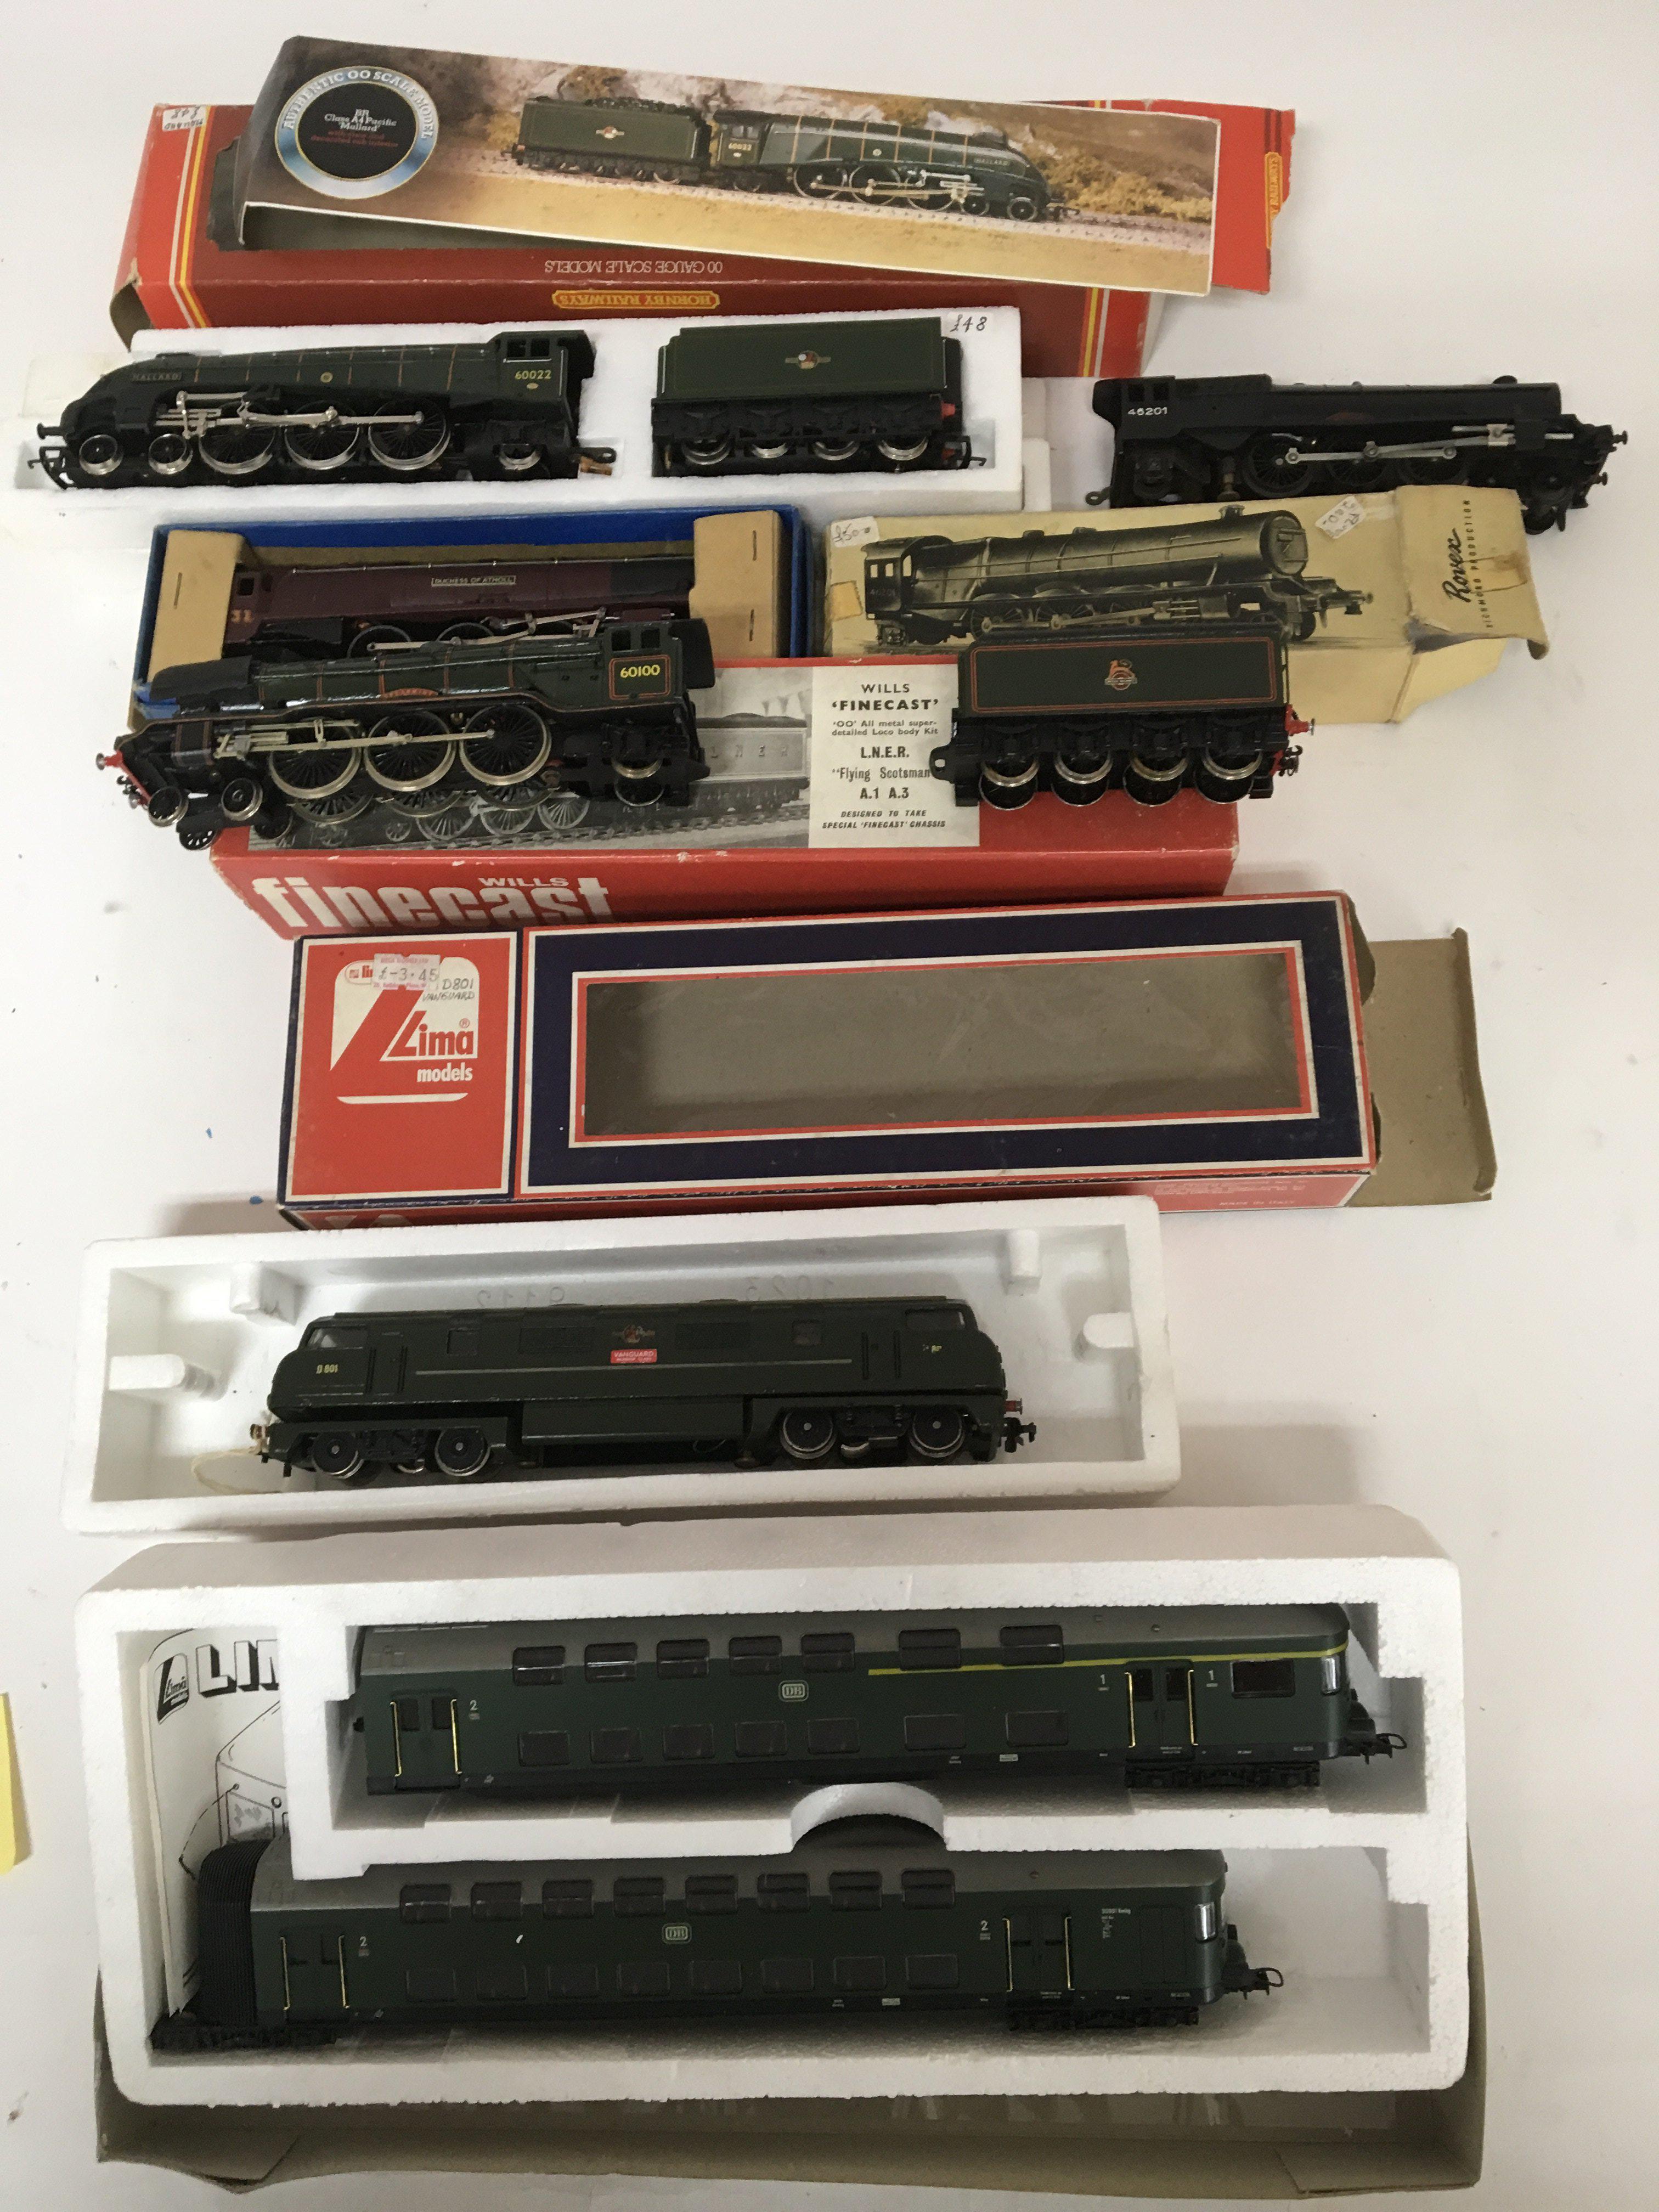 Included are 6 oo gauge locomotives including 2 Lima, 2 hornby 1 Lner Flying Scotsman and a roved